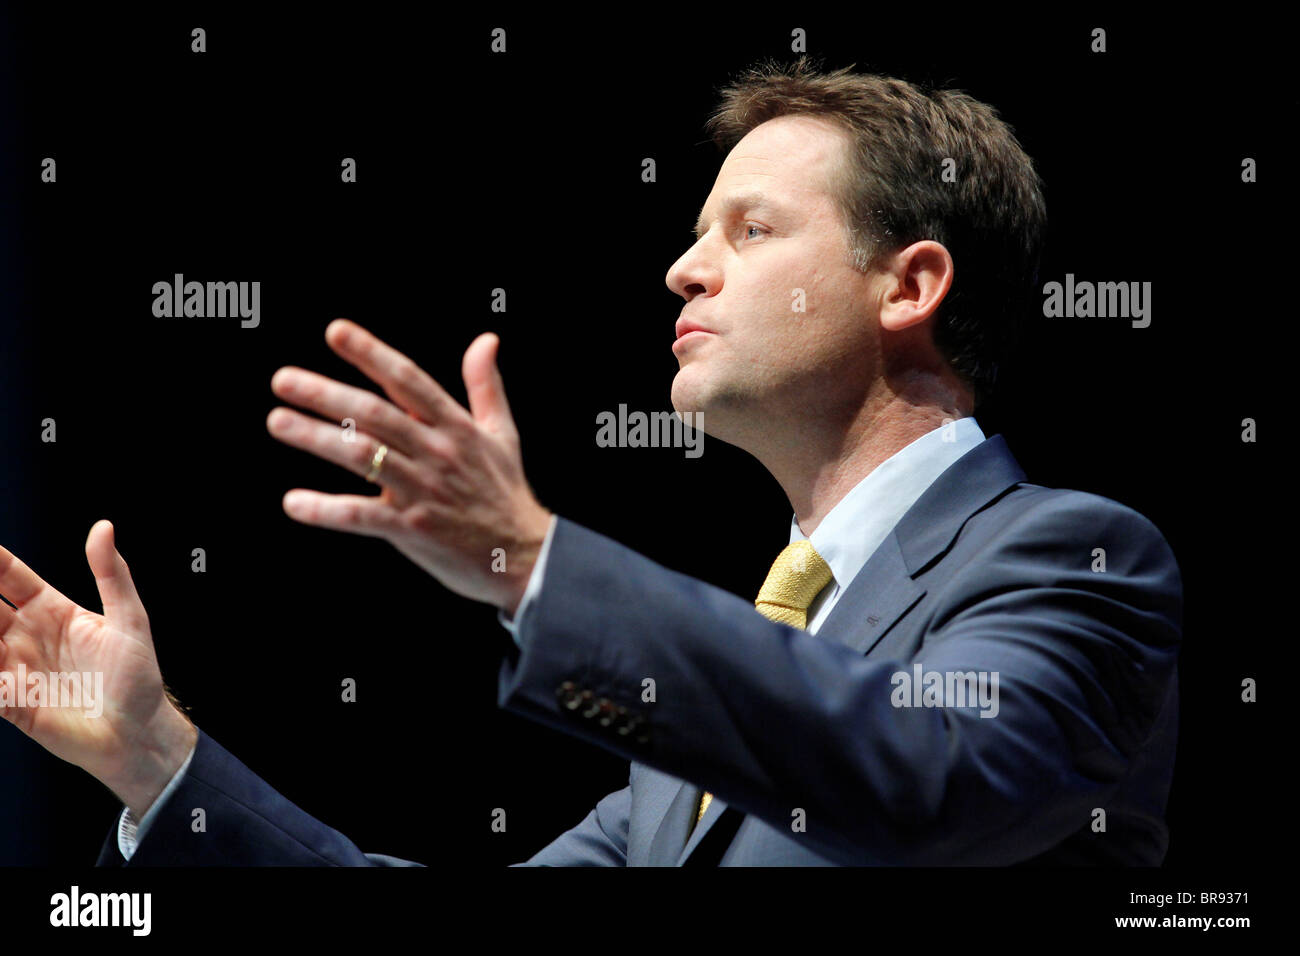 NICK CLEGG MP DEPUTY PRIME MINISTER 20 September 2010 THE AAC LIVERPOOL ENGLAND Stock Photo